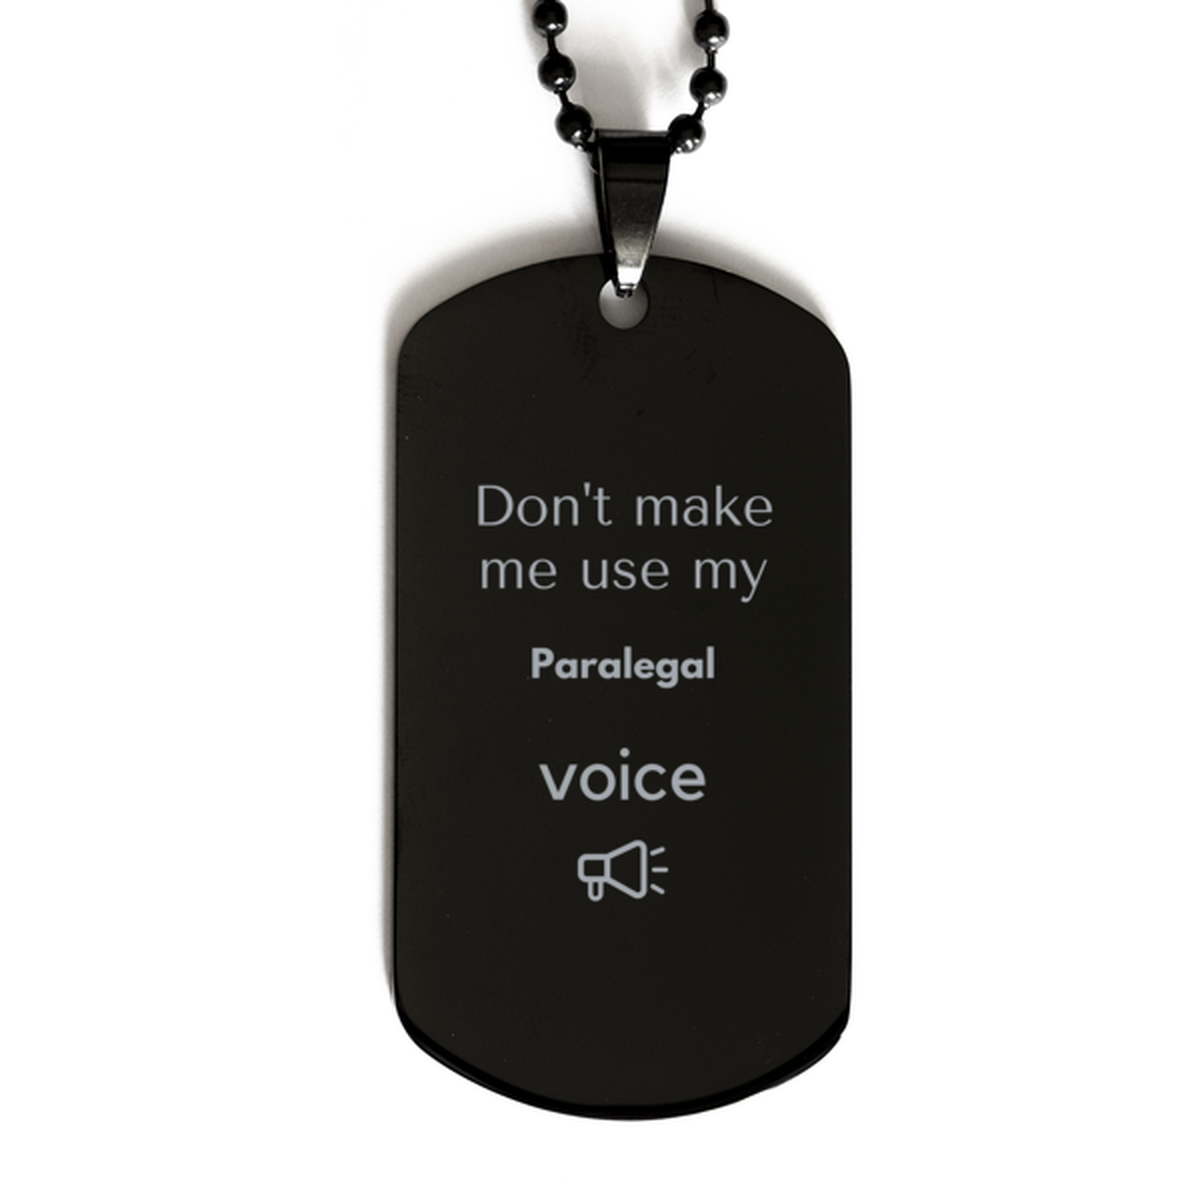 Don't make me use my Paralegal voice, Sarcasm Paralegal Gifts, Christmas Paralegal Black Dog Tag Birthday Unique Gifts For Paralegal Coworkers, Men, Women, Colleague, Friends